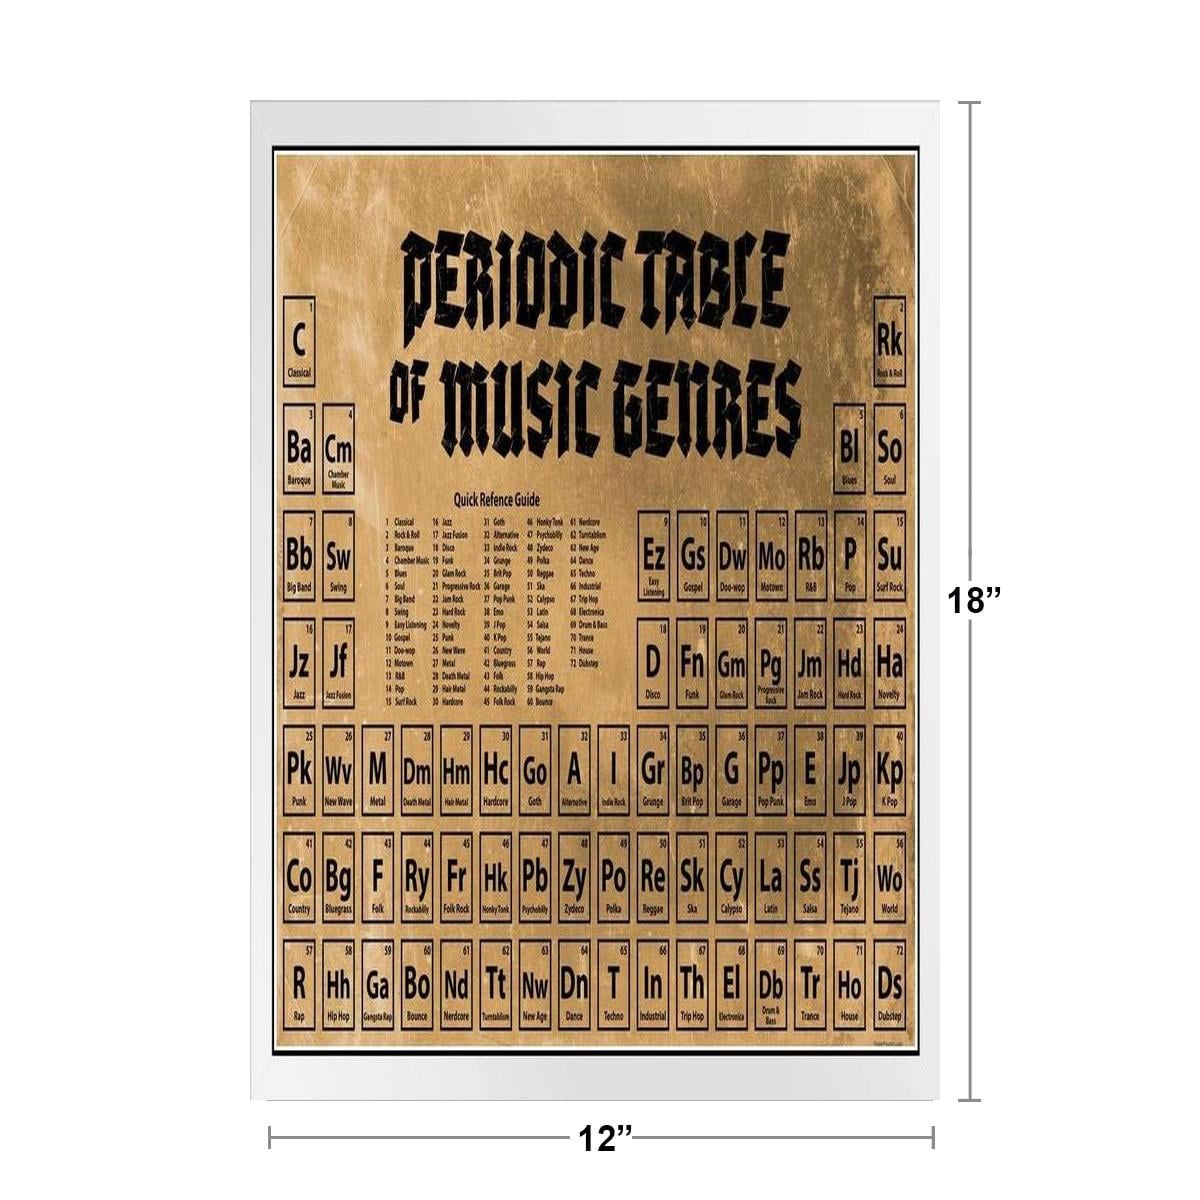 Periodic Table of Music Genres Styles Vintage Reference Chart Music Theory Classroom Classical Rock and Roll Posters Guitar Heavy Metal Band Notation Classroom Black Wood Framed Art Poster 14x20